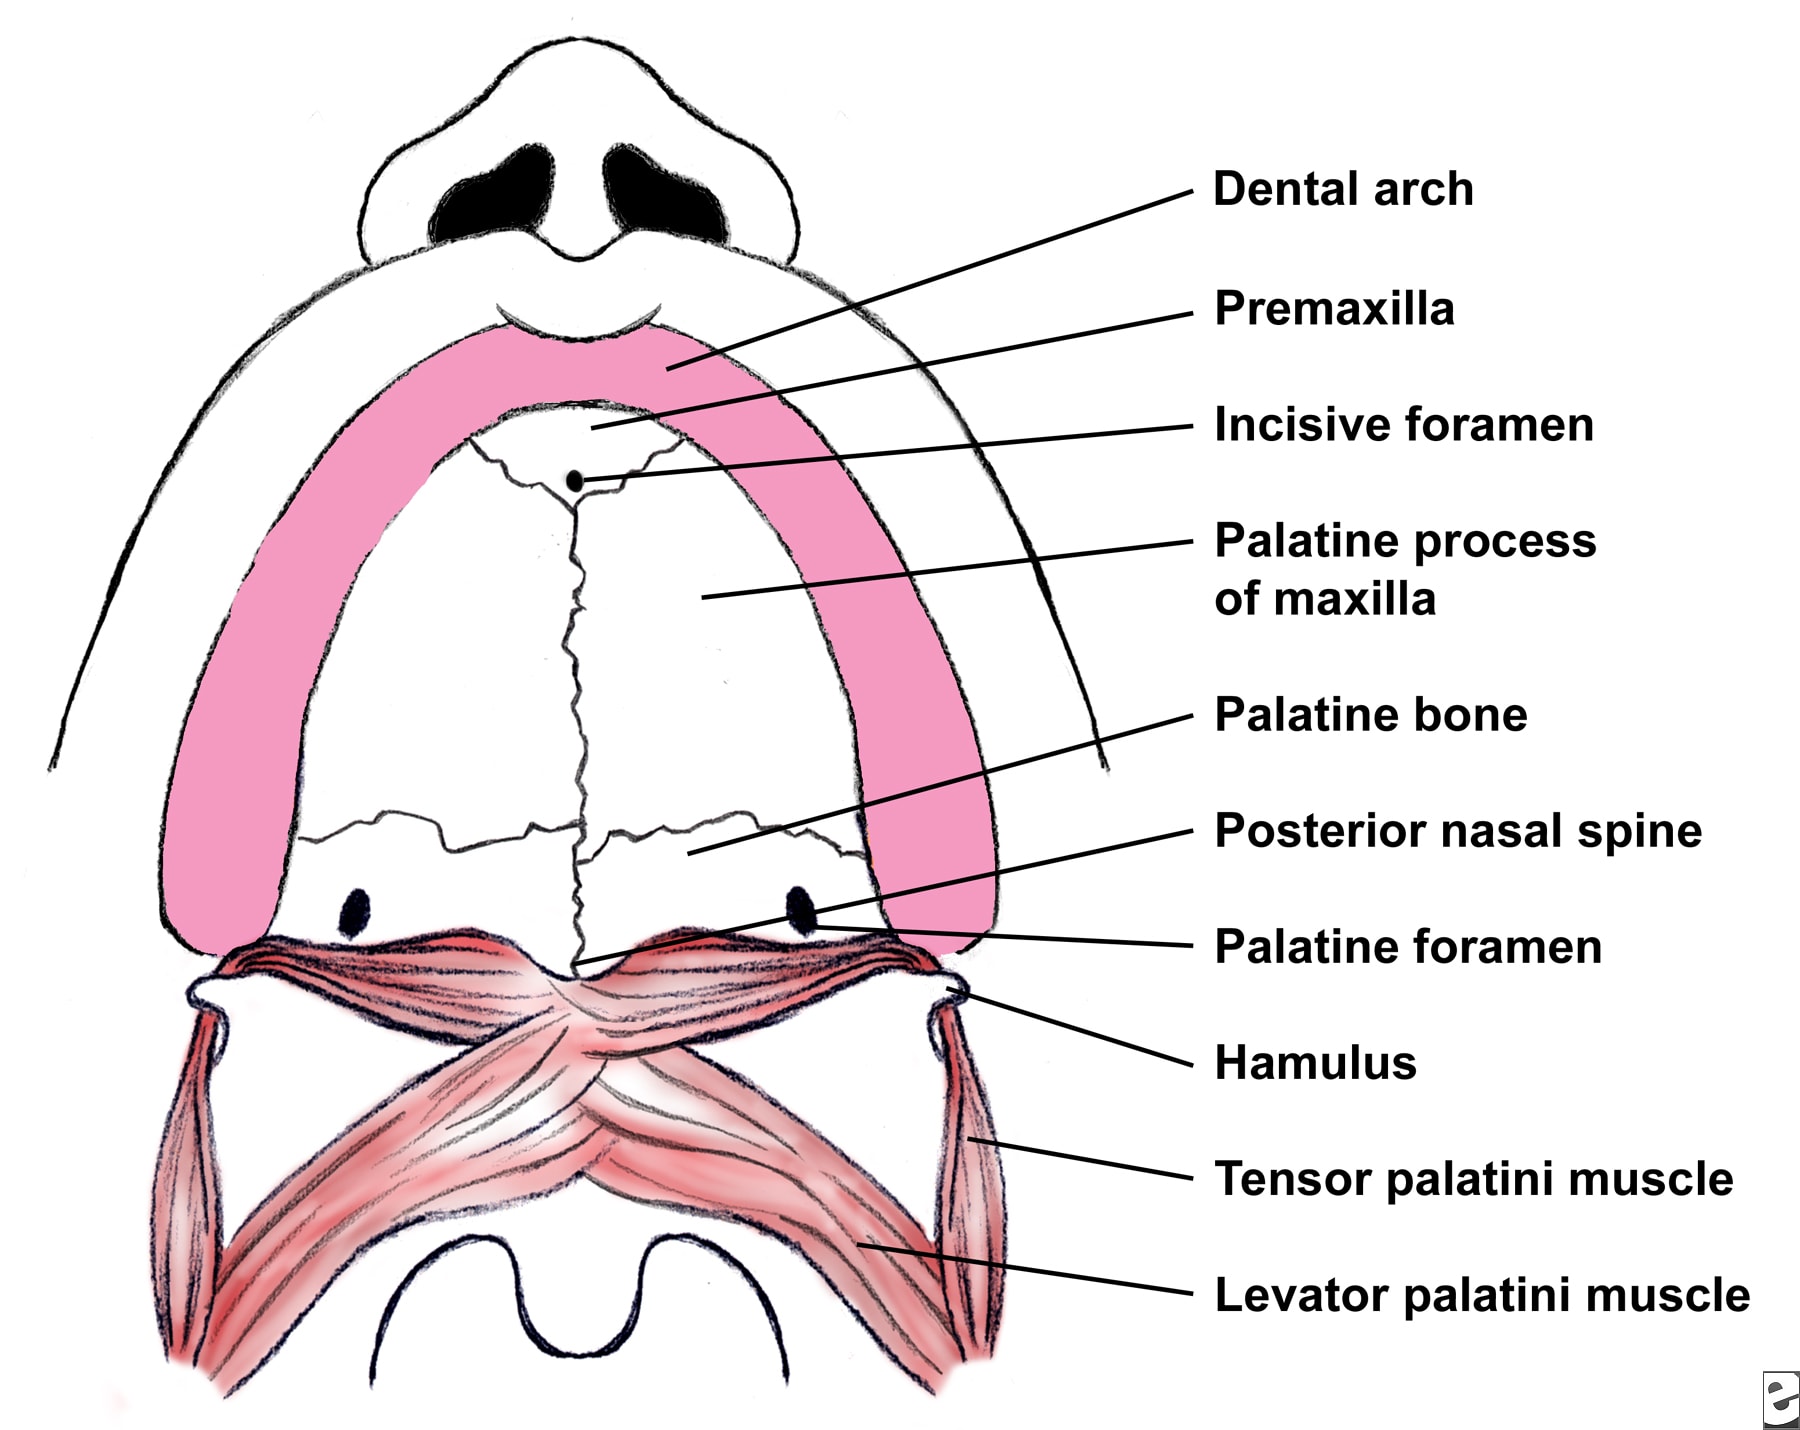 Normal anatomy of the palate.